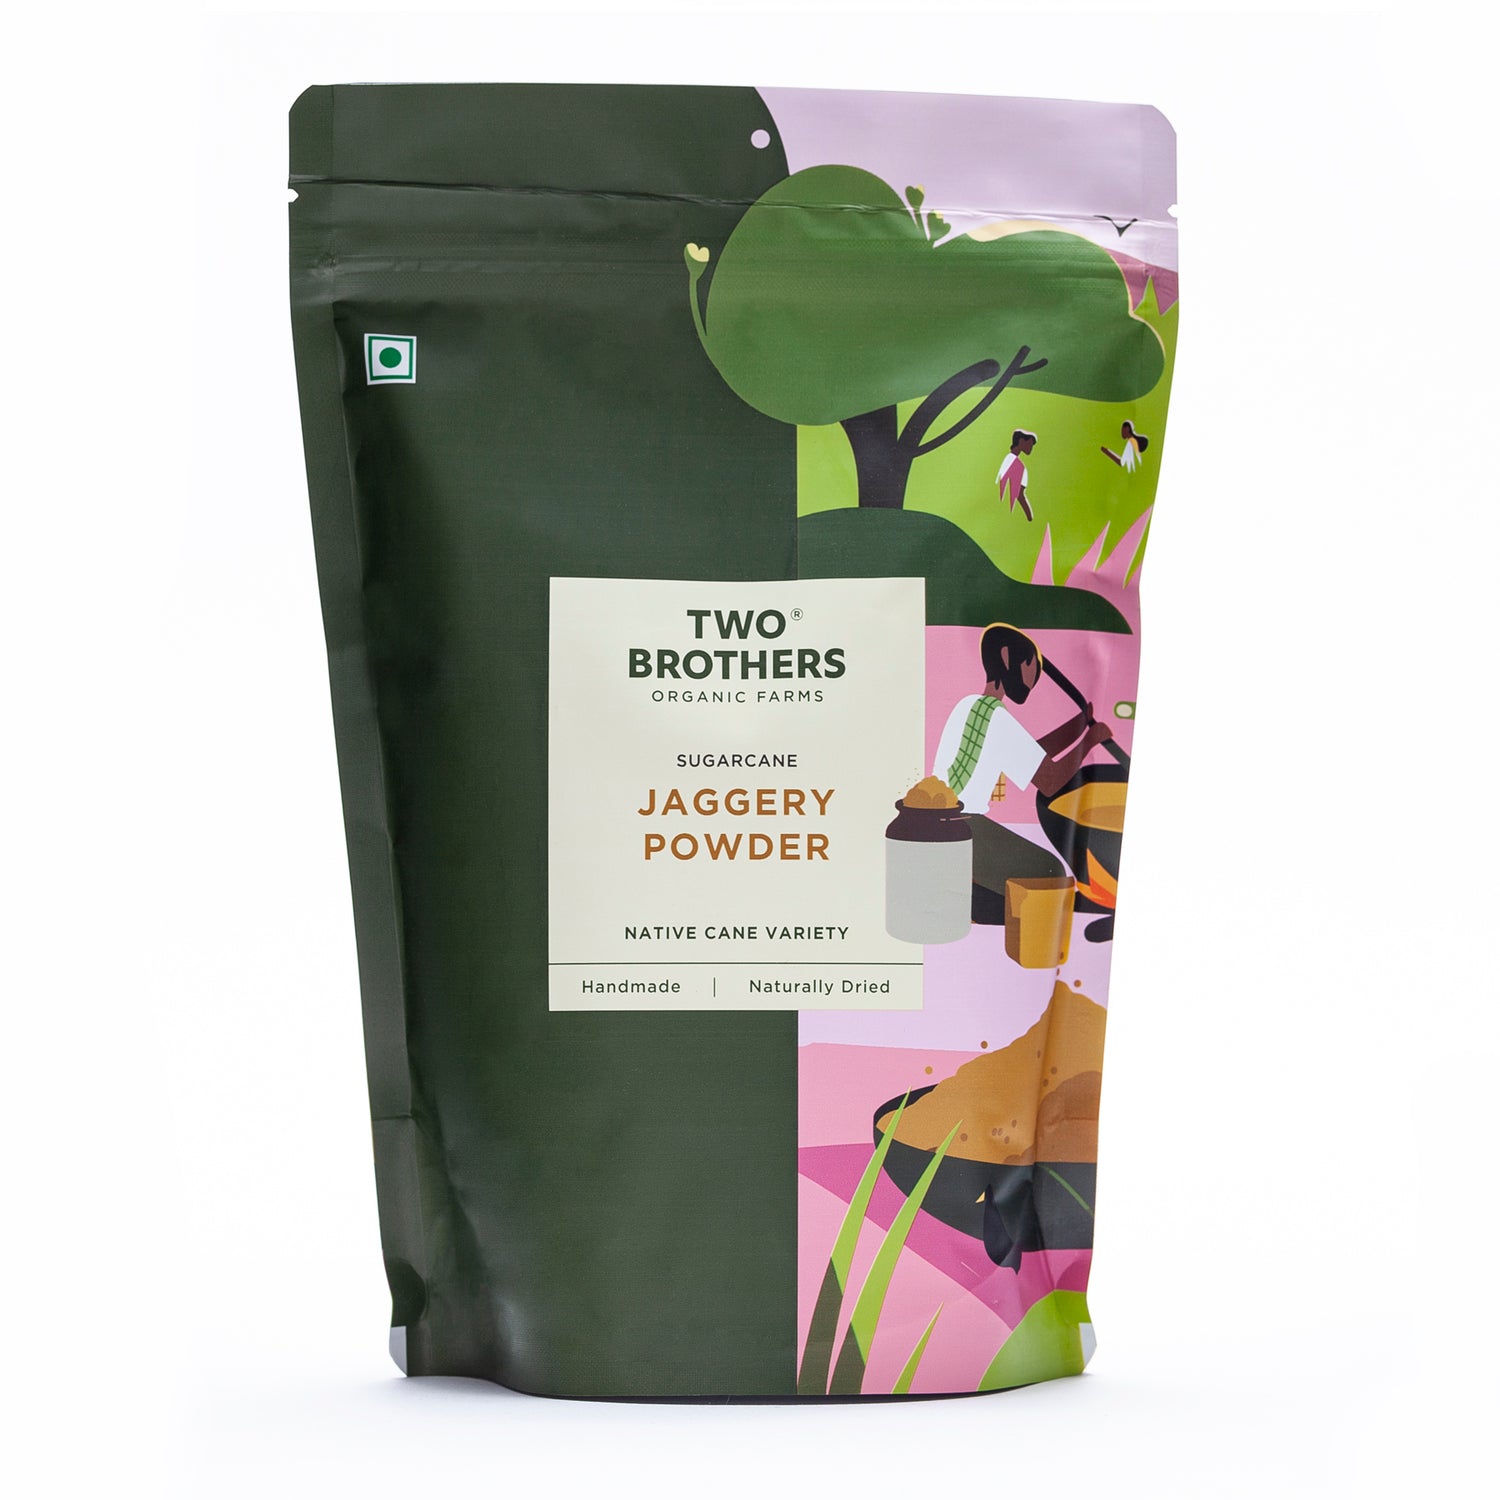 Two Brothers Organic Farms Jaggery Powder